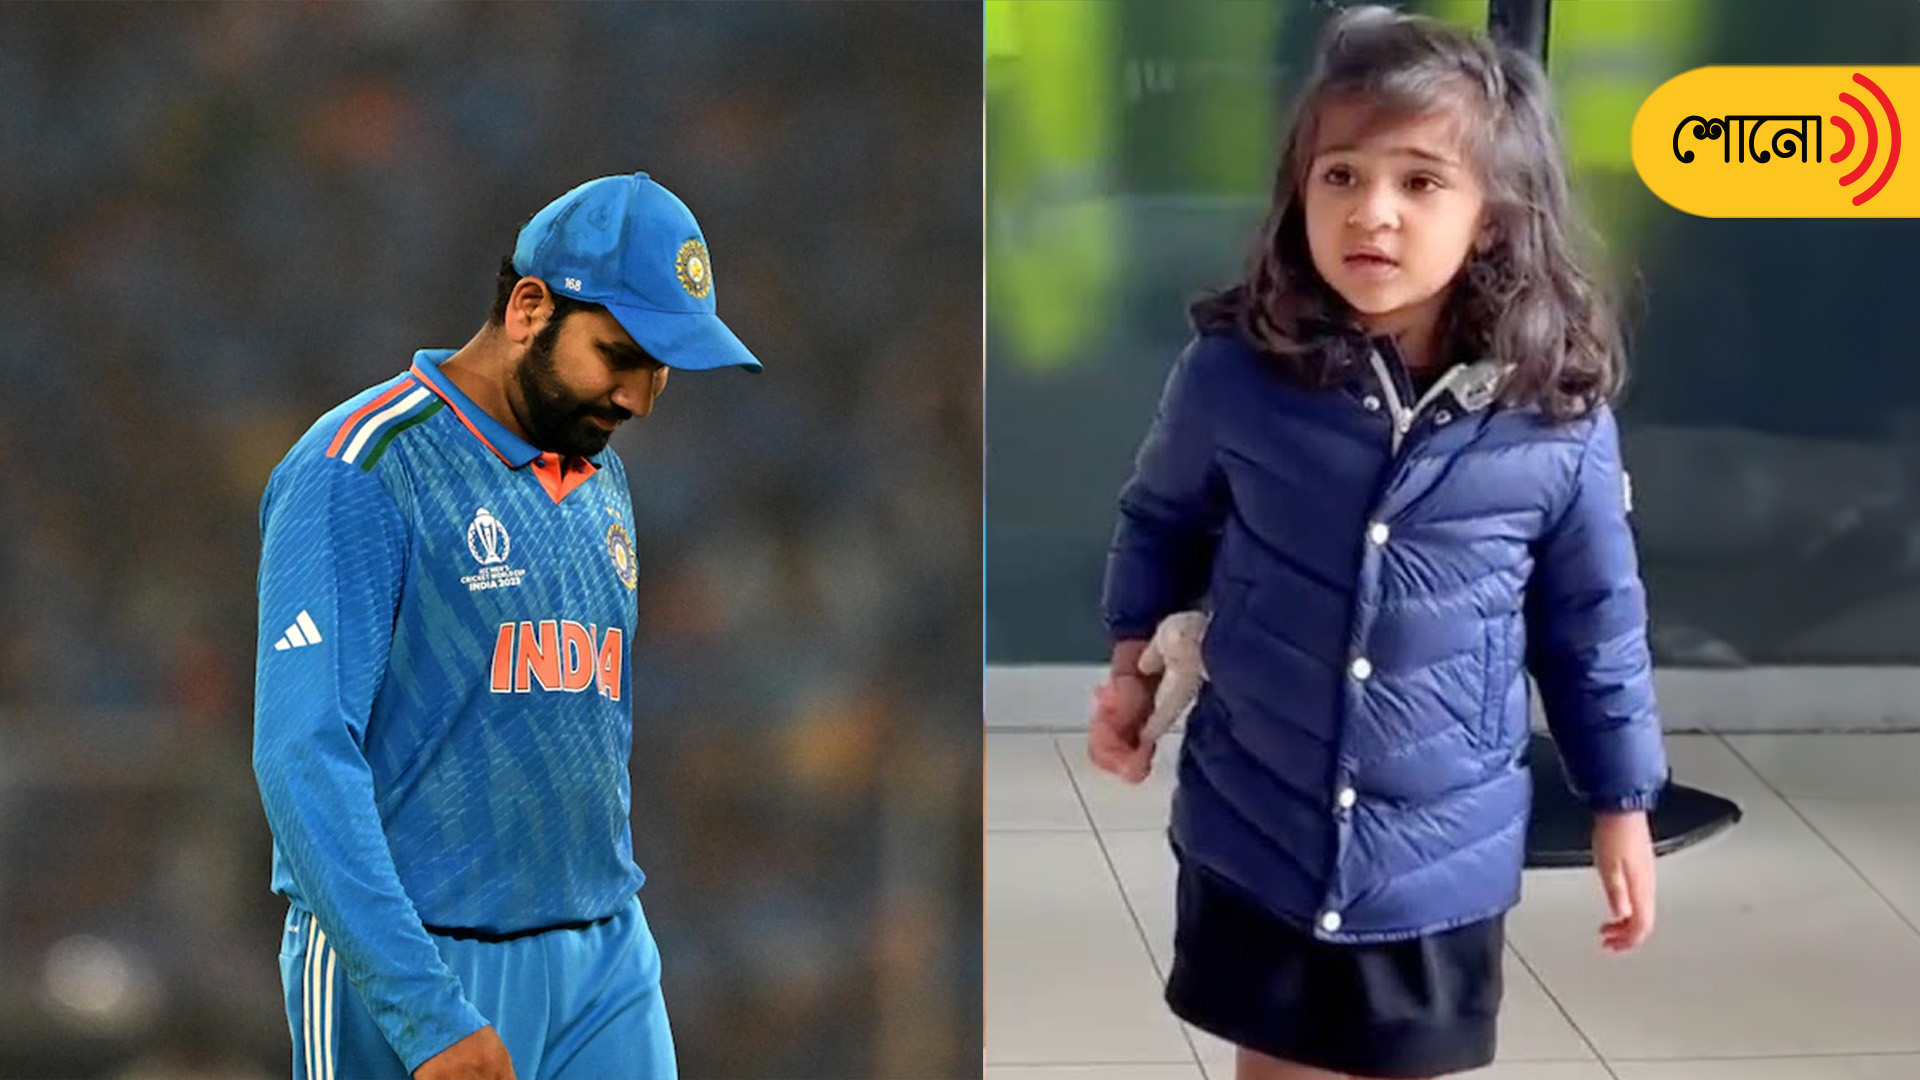 Rohit Sharma's daughter's video resurfaces after World Cup loss